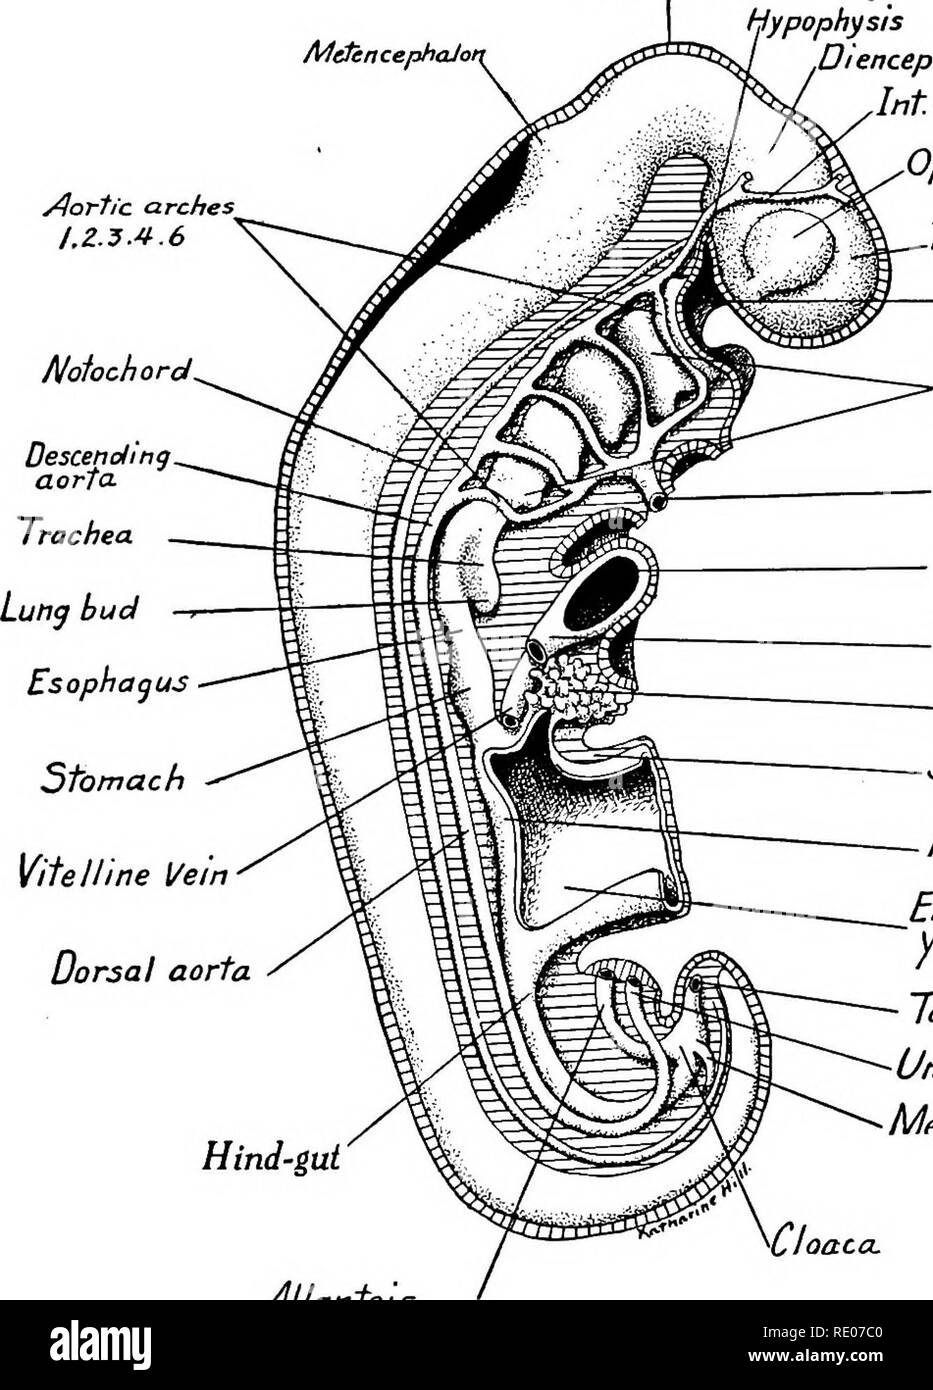 . A laboratory manual and text-book of embryology. Embryology. go THE FETAL MEMBRANES AND EARLY HUMAN EMBRYOS culum of the hypophysis (Rathke's pocket). The fore-gut proper begins with a shallow out-pocketing known as Seessel's pocket. As the pharyngeal mem- brane disappears between these two pockets, it would seem that Seessel's pocket represents the persistence of the blind anterior end of the fore-gut. No other significance has been assigned to it. Mesencephalon tf cephalic flexure Hypophysis MdcncephaJot Aortic arches Z.2.3.4.6 A/otochord. Diencephalon Int. carotid artery Optic vesicle Tro Stock Photo